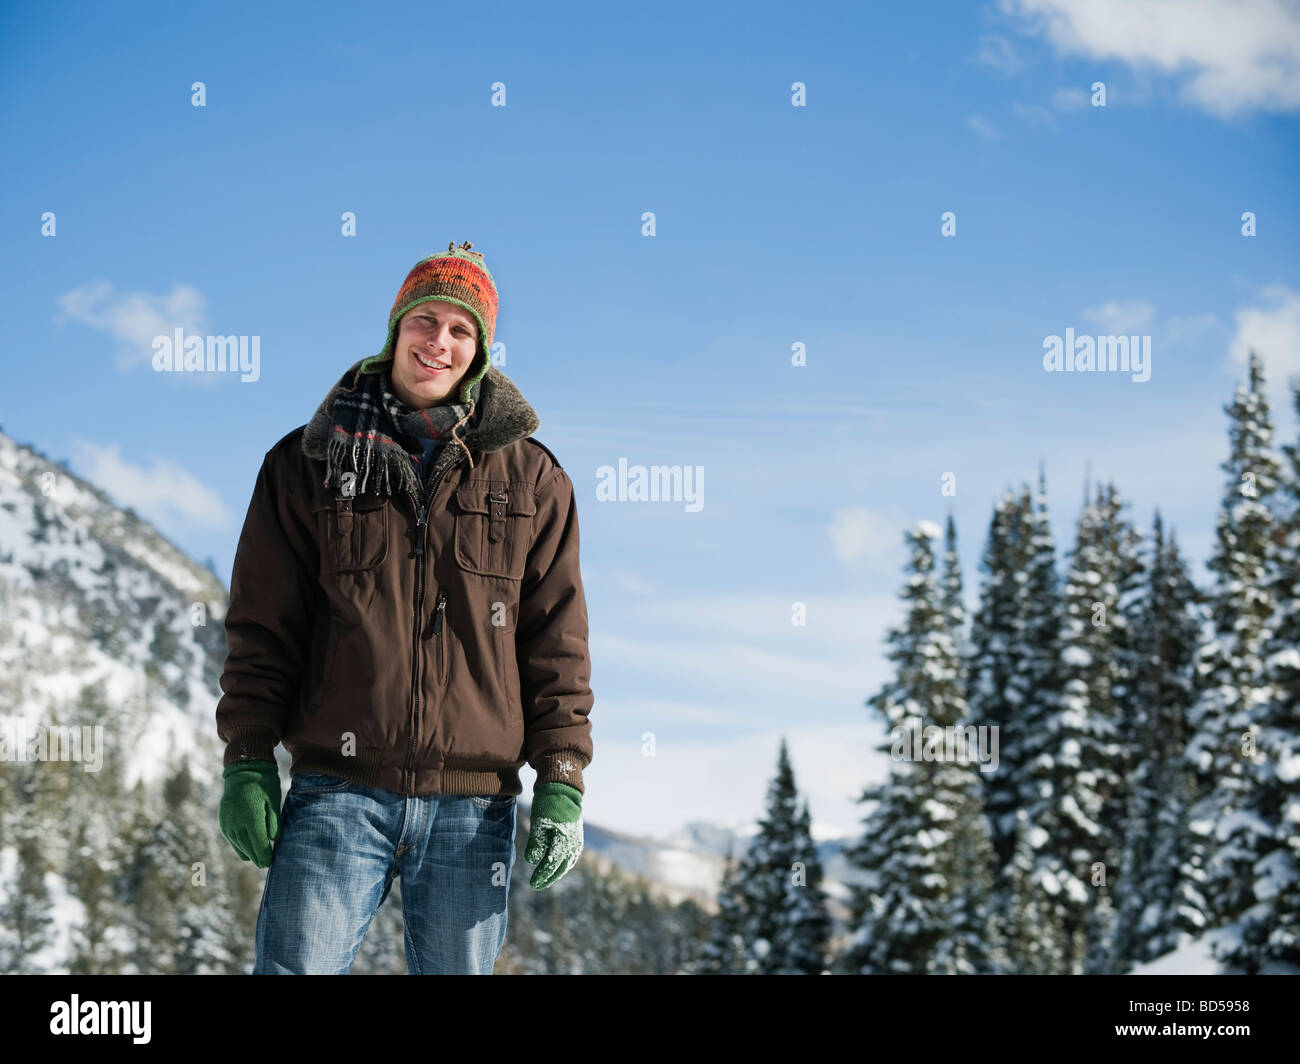 A man outdoors in snowy surroundings Stock Photo